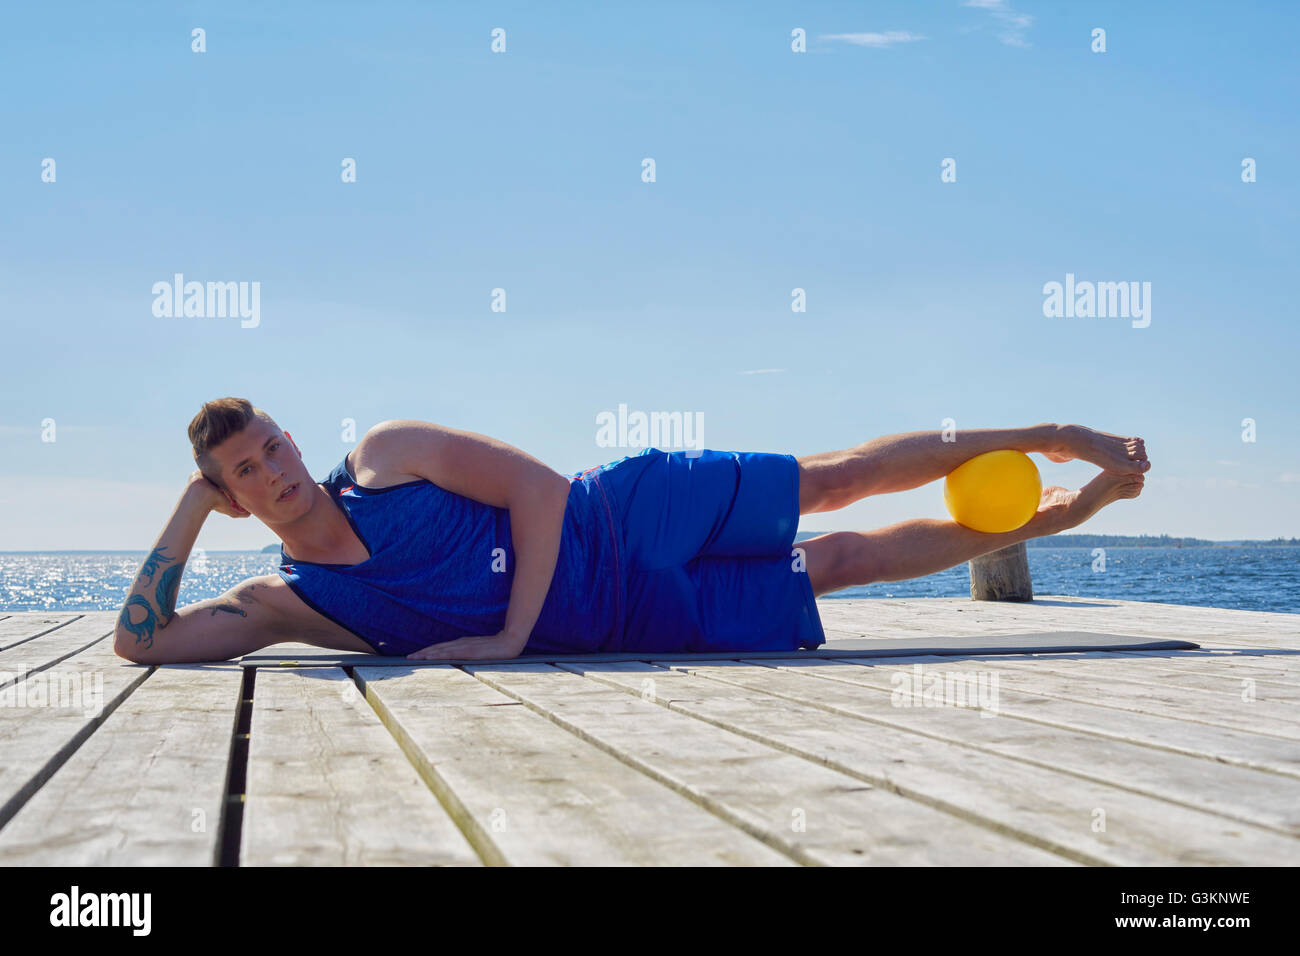 Man lying on side on pier, resting on elbow ball between legs looking at camera Stock Photo